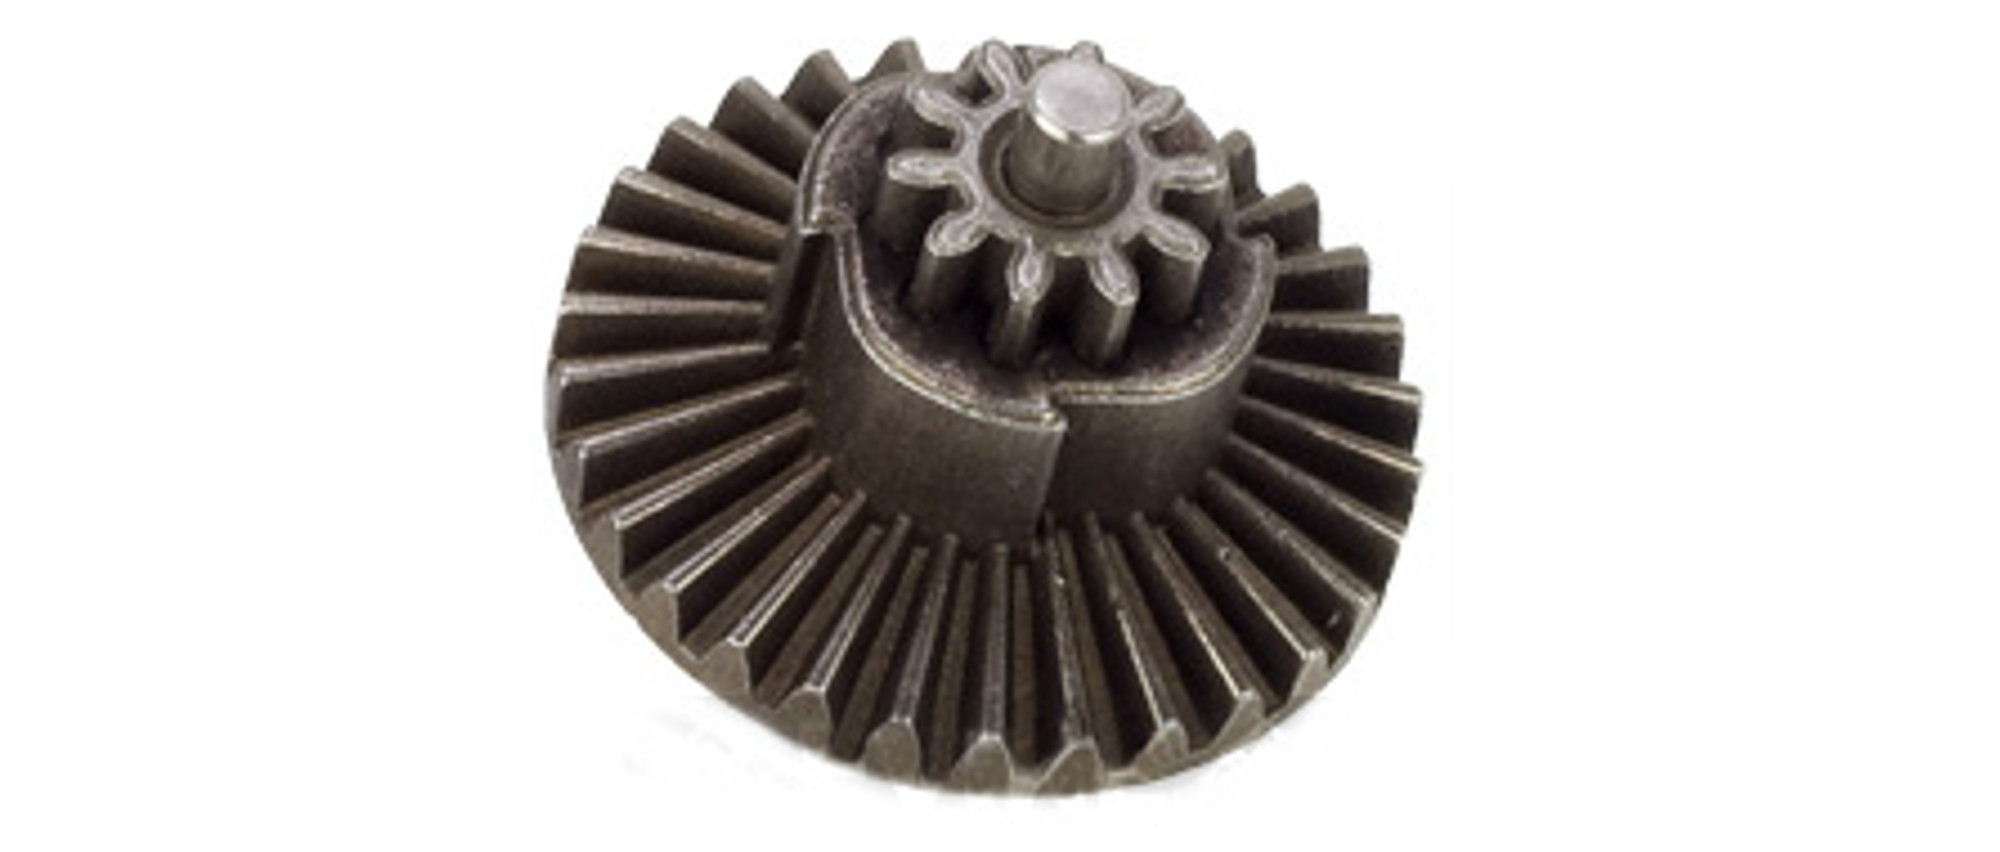 OEM CNC Steel Bevel Gear for Airsoft AEG Gearbox